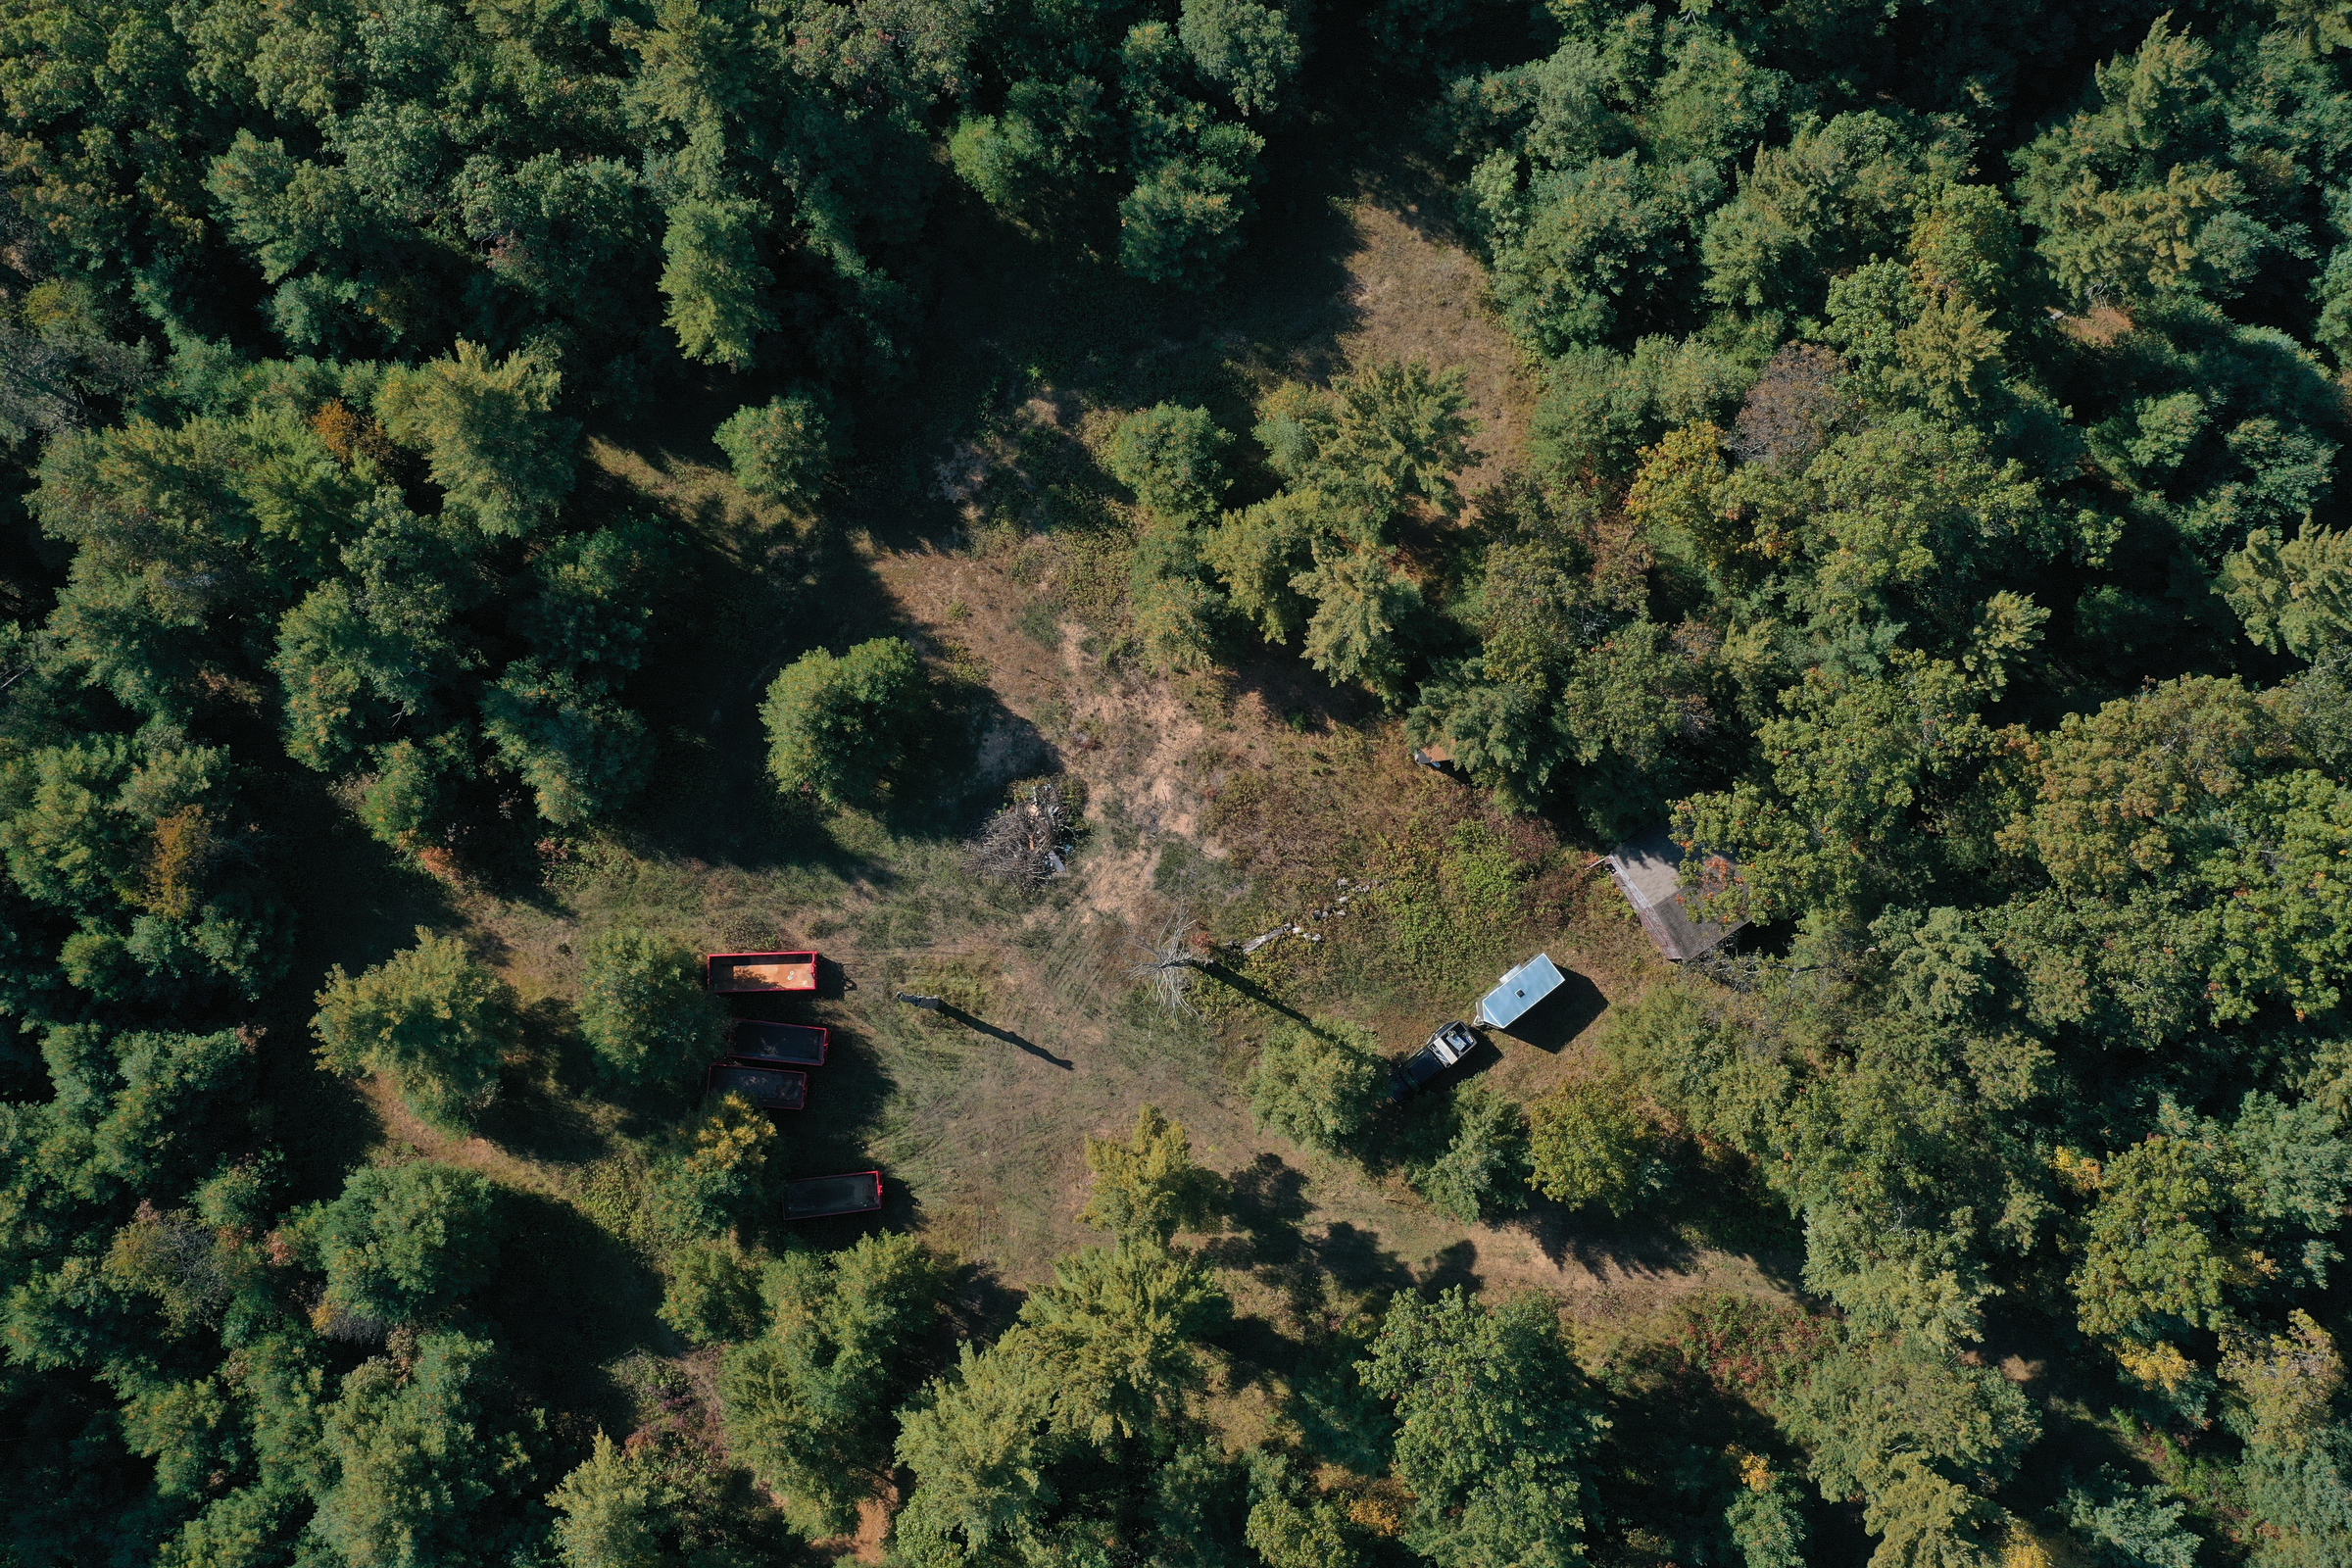 Aerial view of Zach Skrede's property showing an open field surrounded by woods